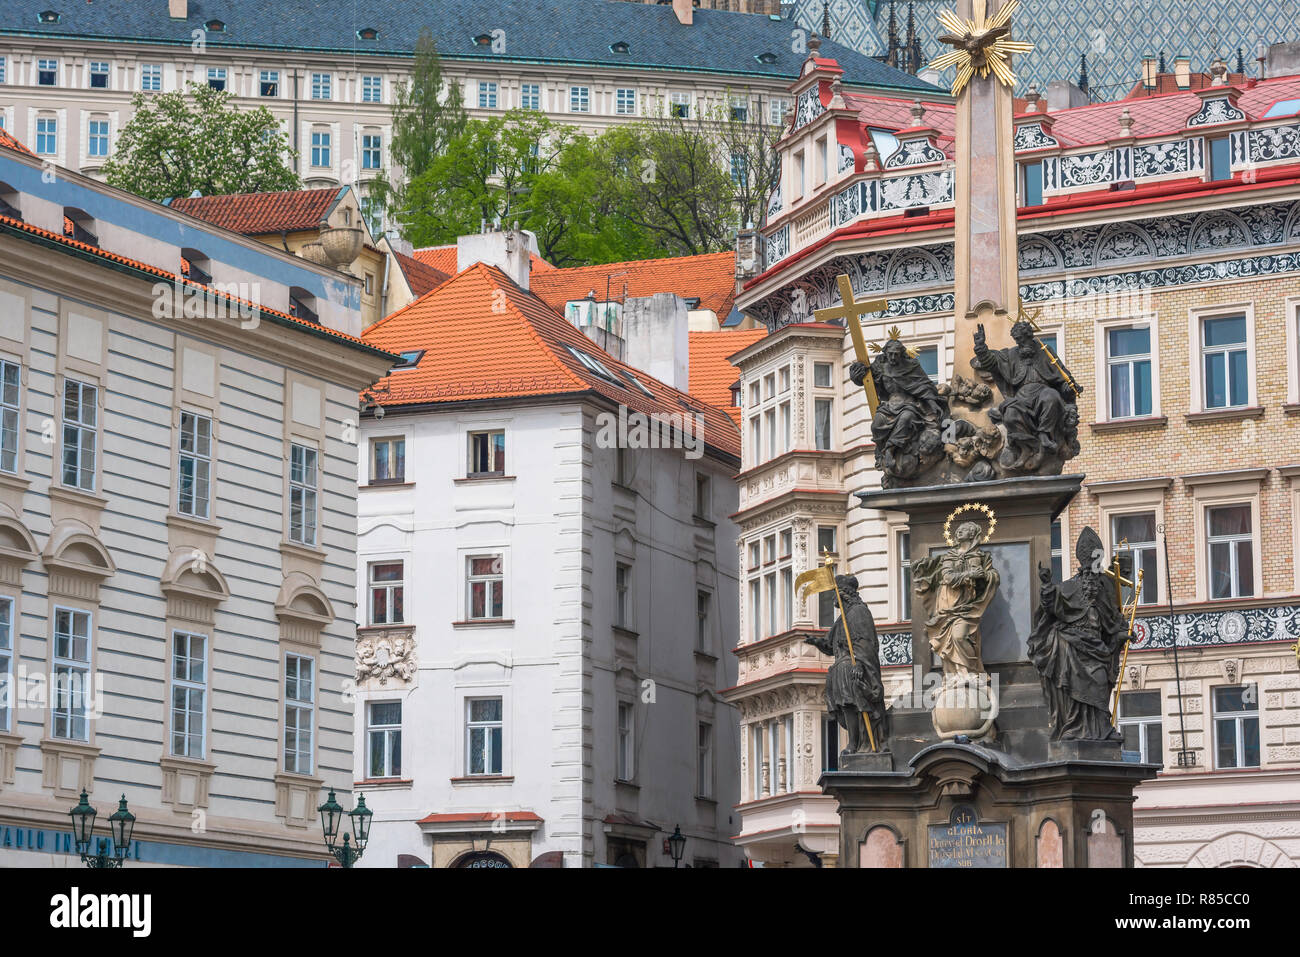 Prague Baroque, view of the 17th century Plague Monument and Baroque buildings sited in Malostranske Namesti in the Mala Strana area of Prague. Stock Photo